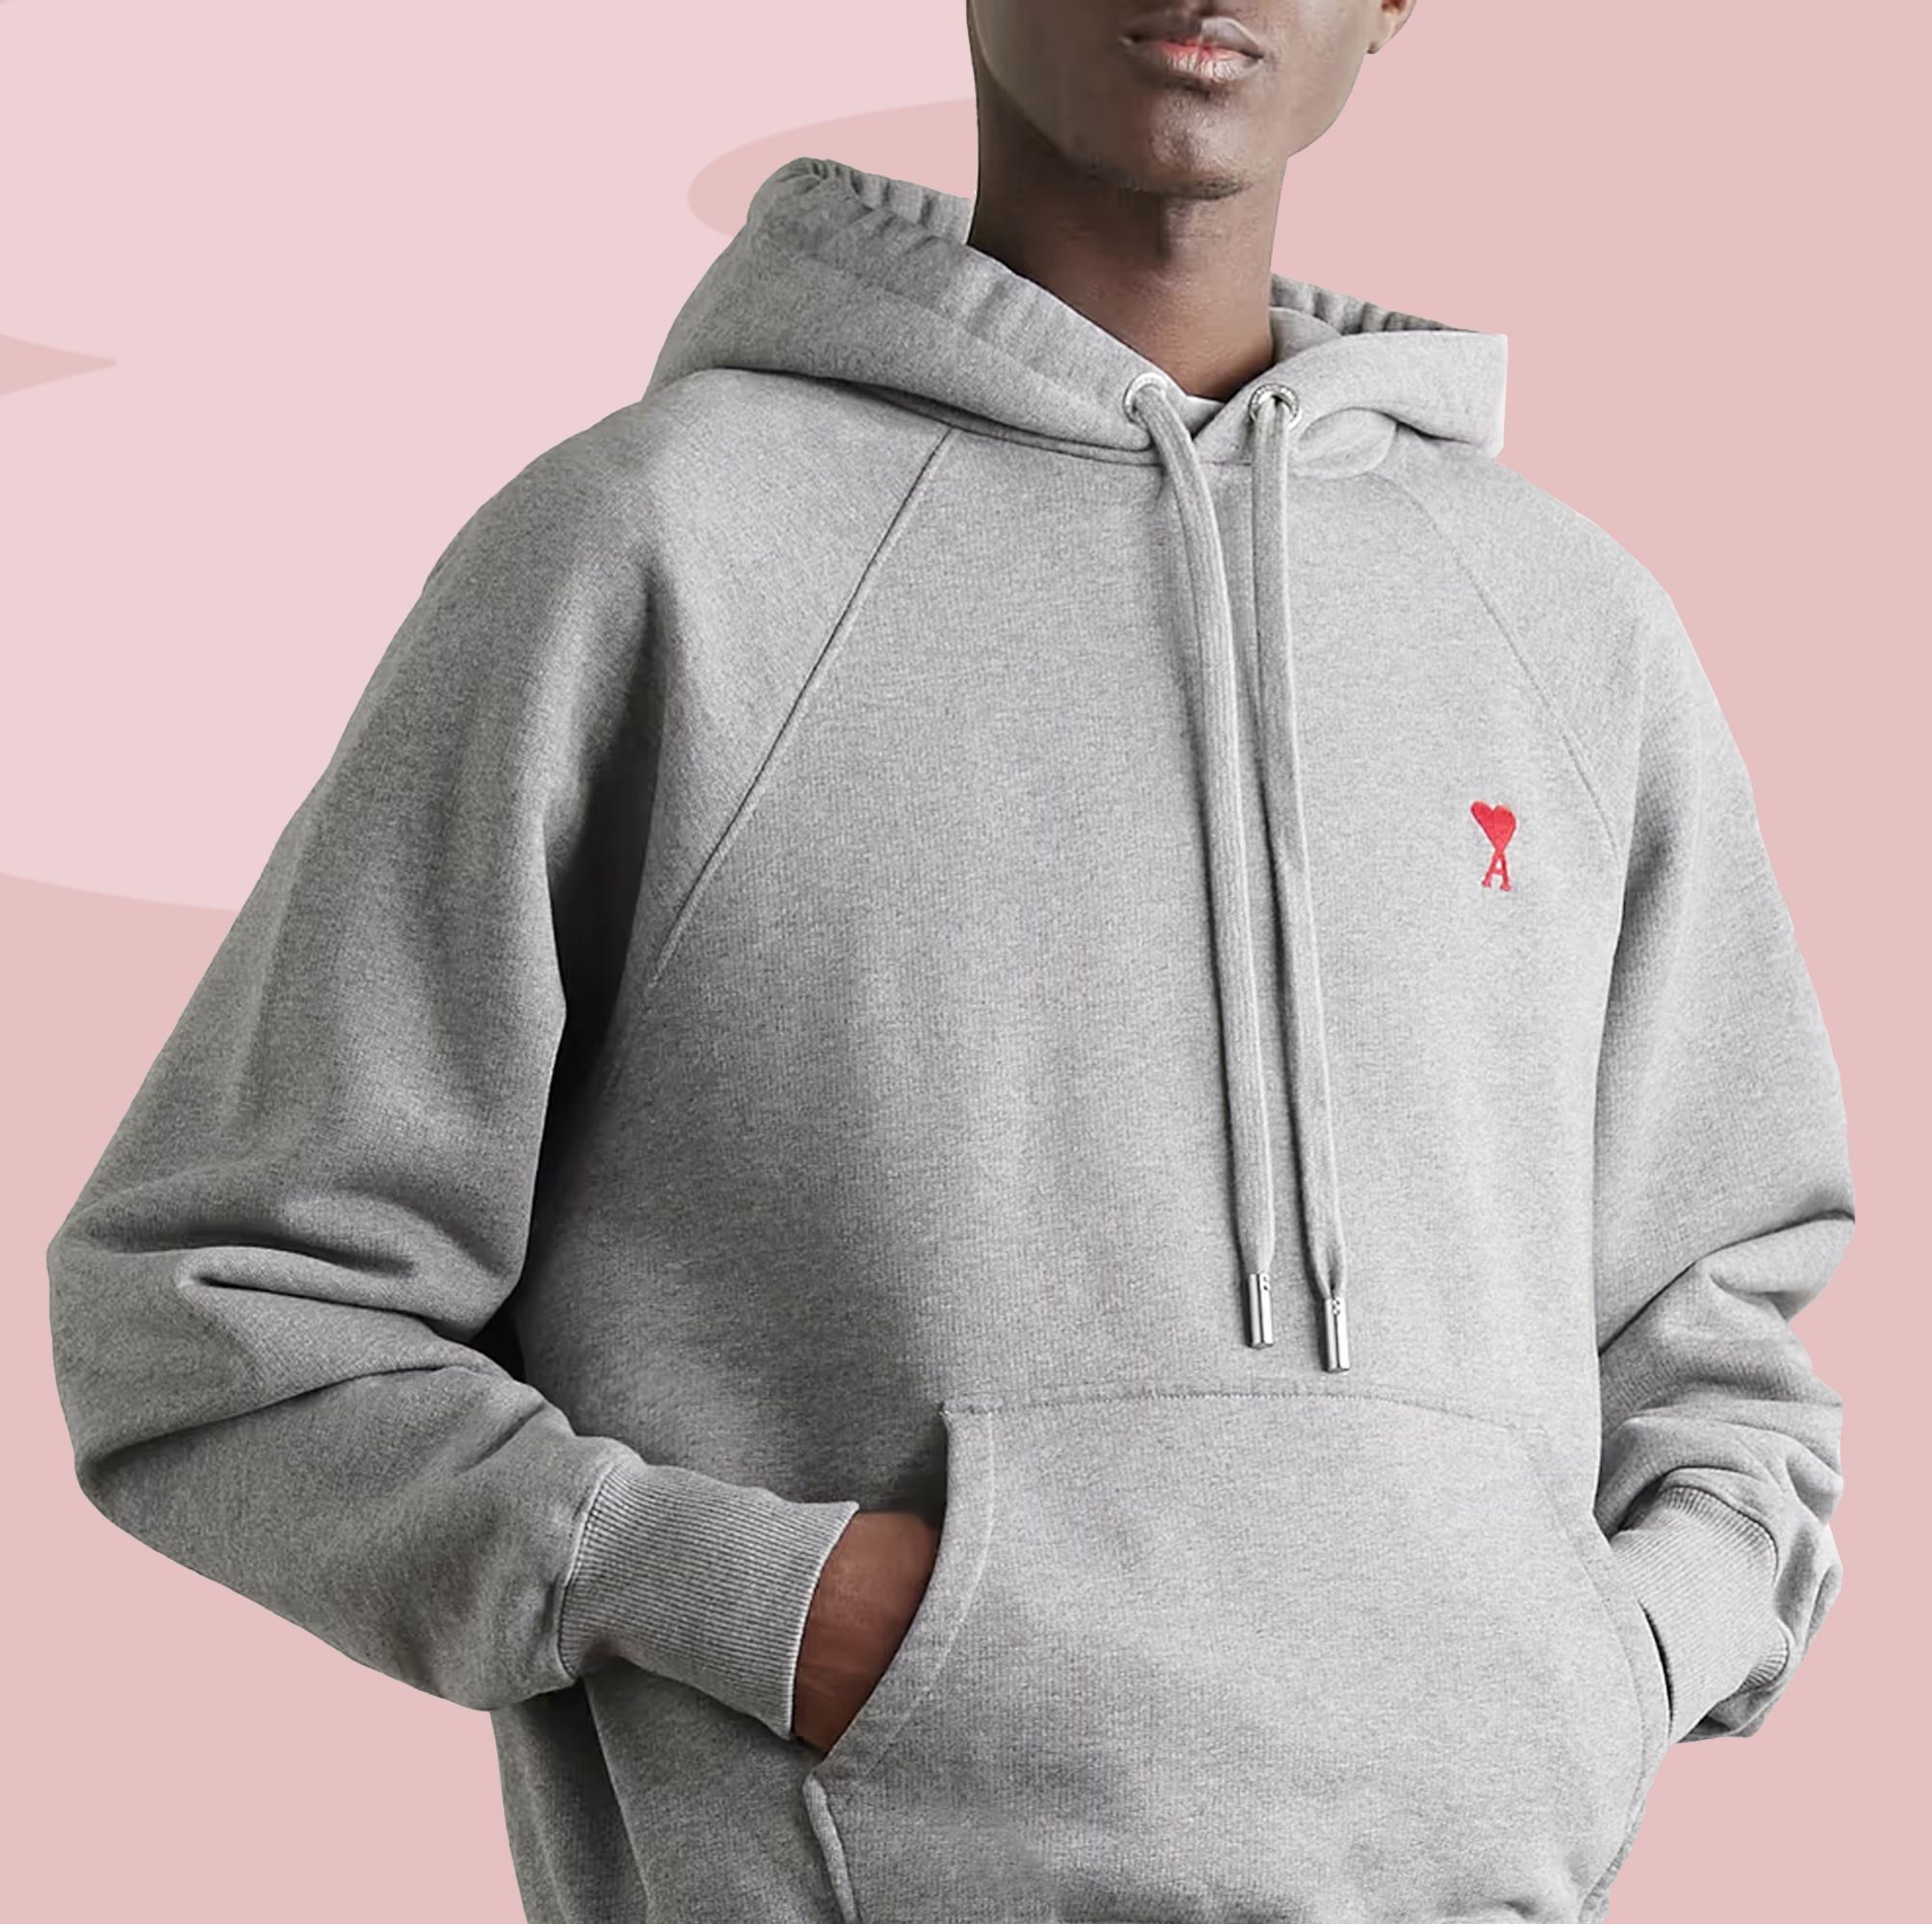 We're in the Golden Age of Hoodies. Make Sure Yours Rises to the Occasion.